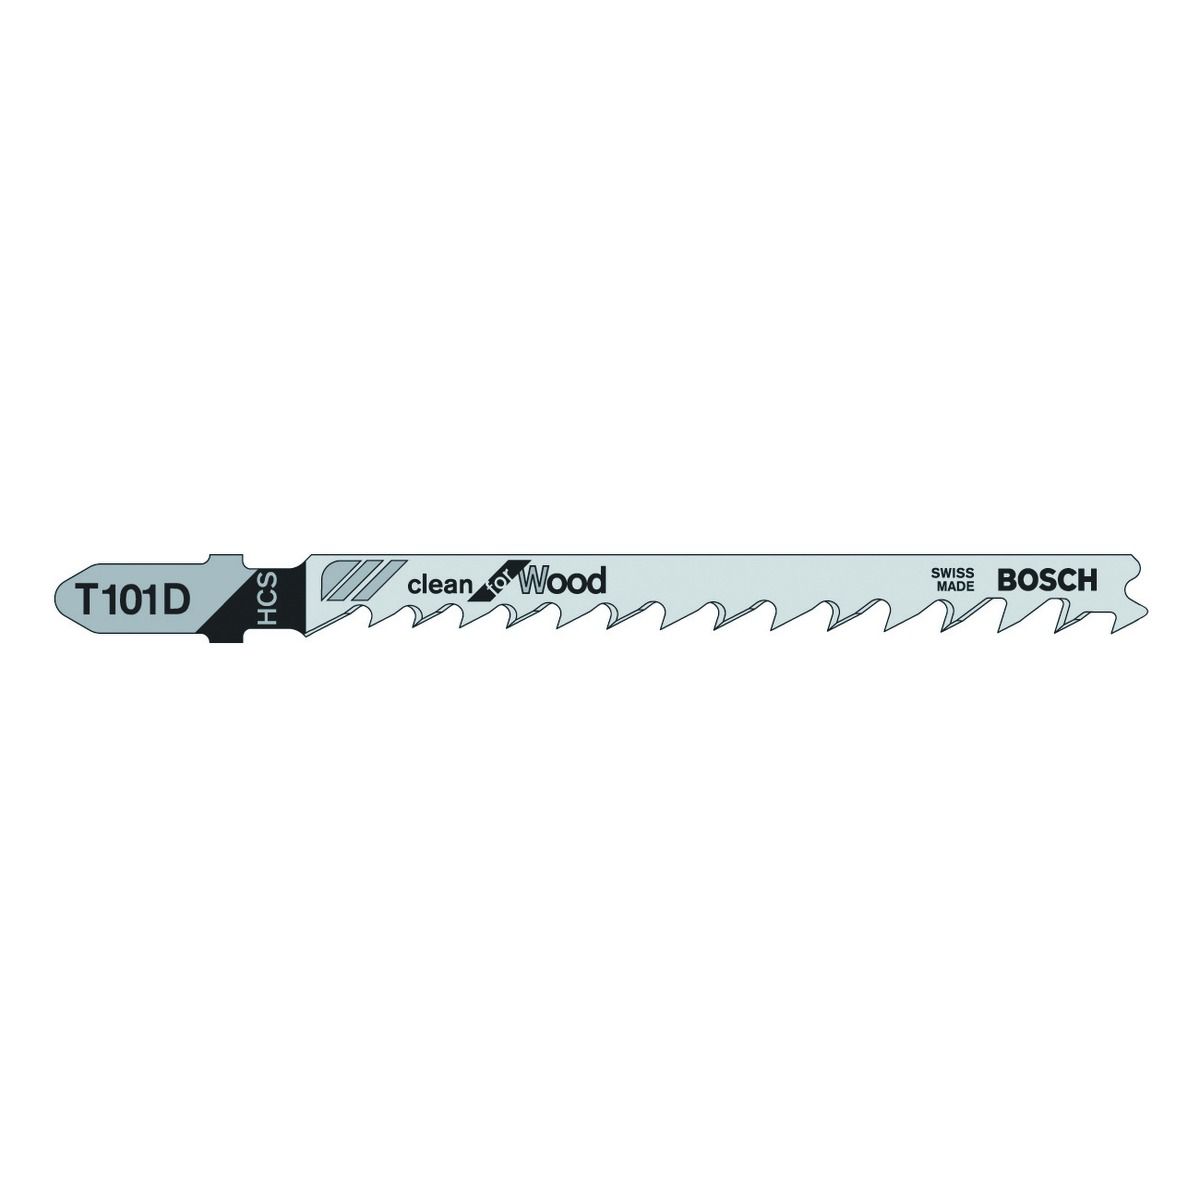 Image of Bosch T101D Wood Jigsaw Blades - Pack of 5